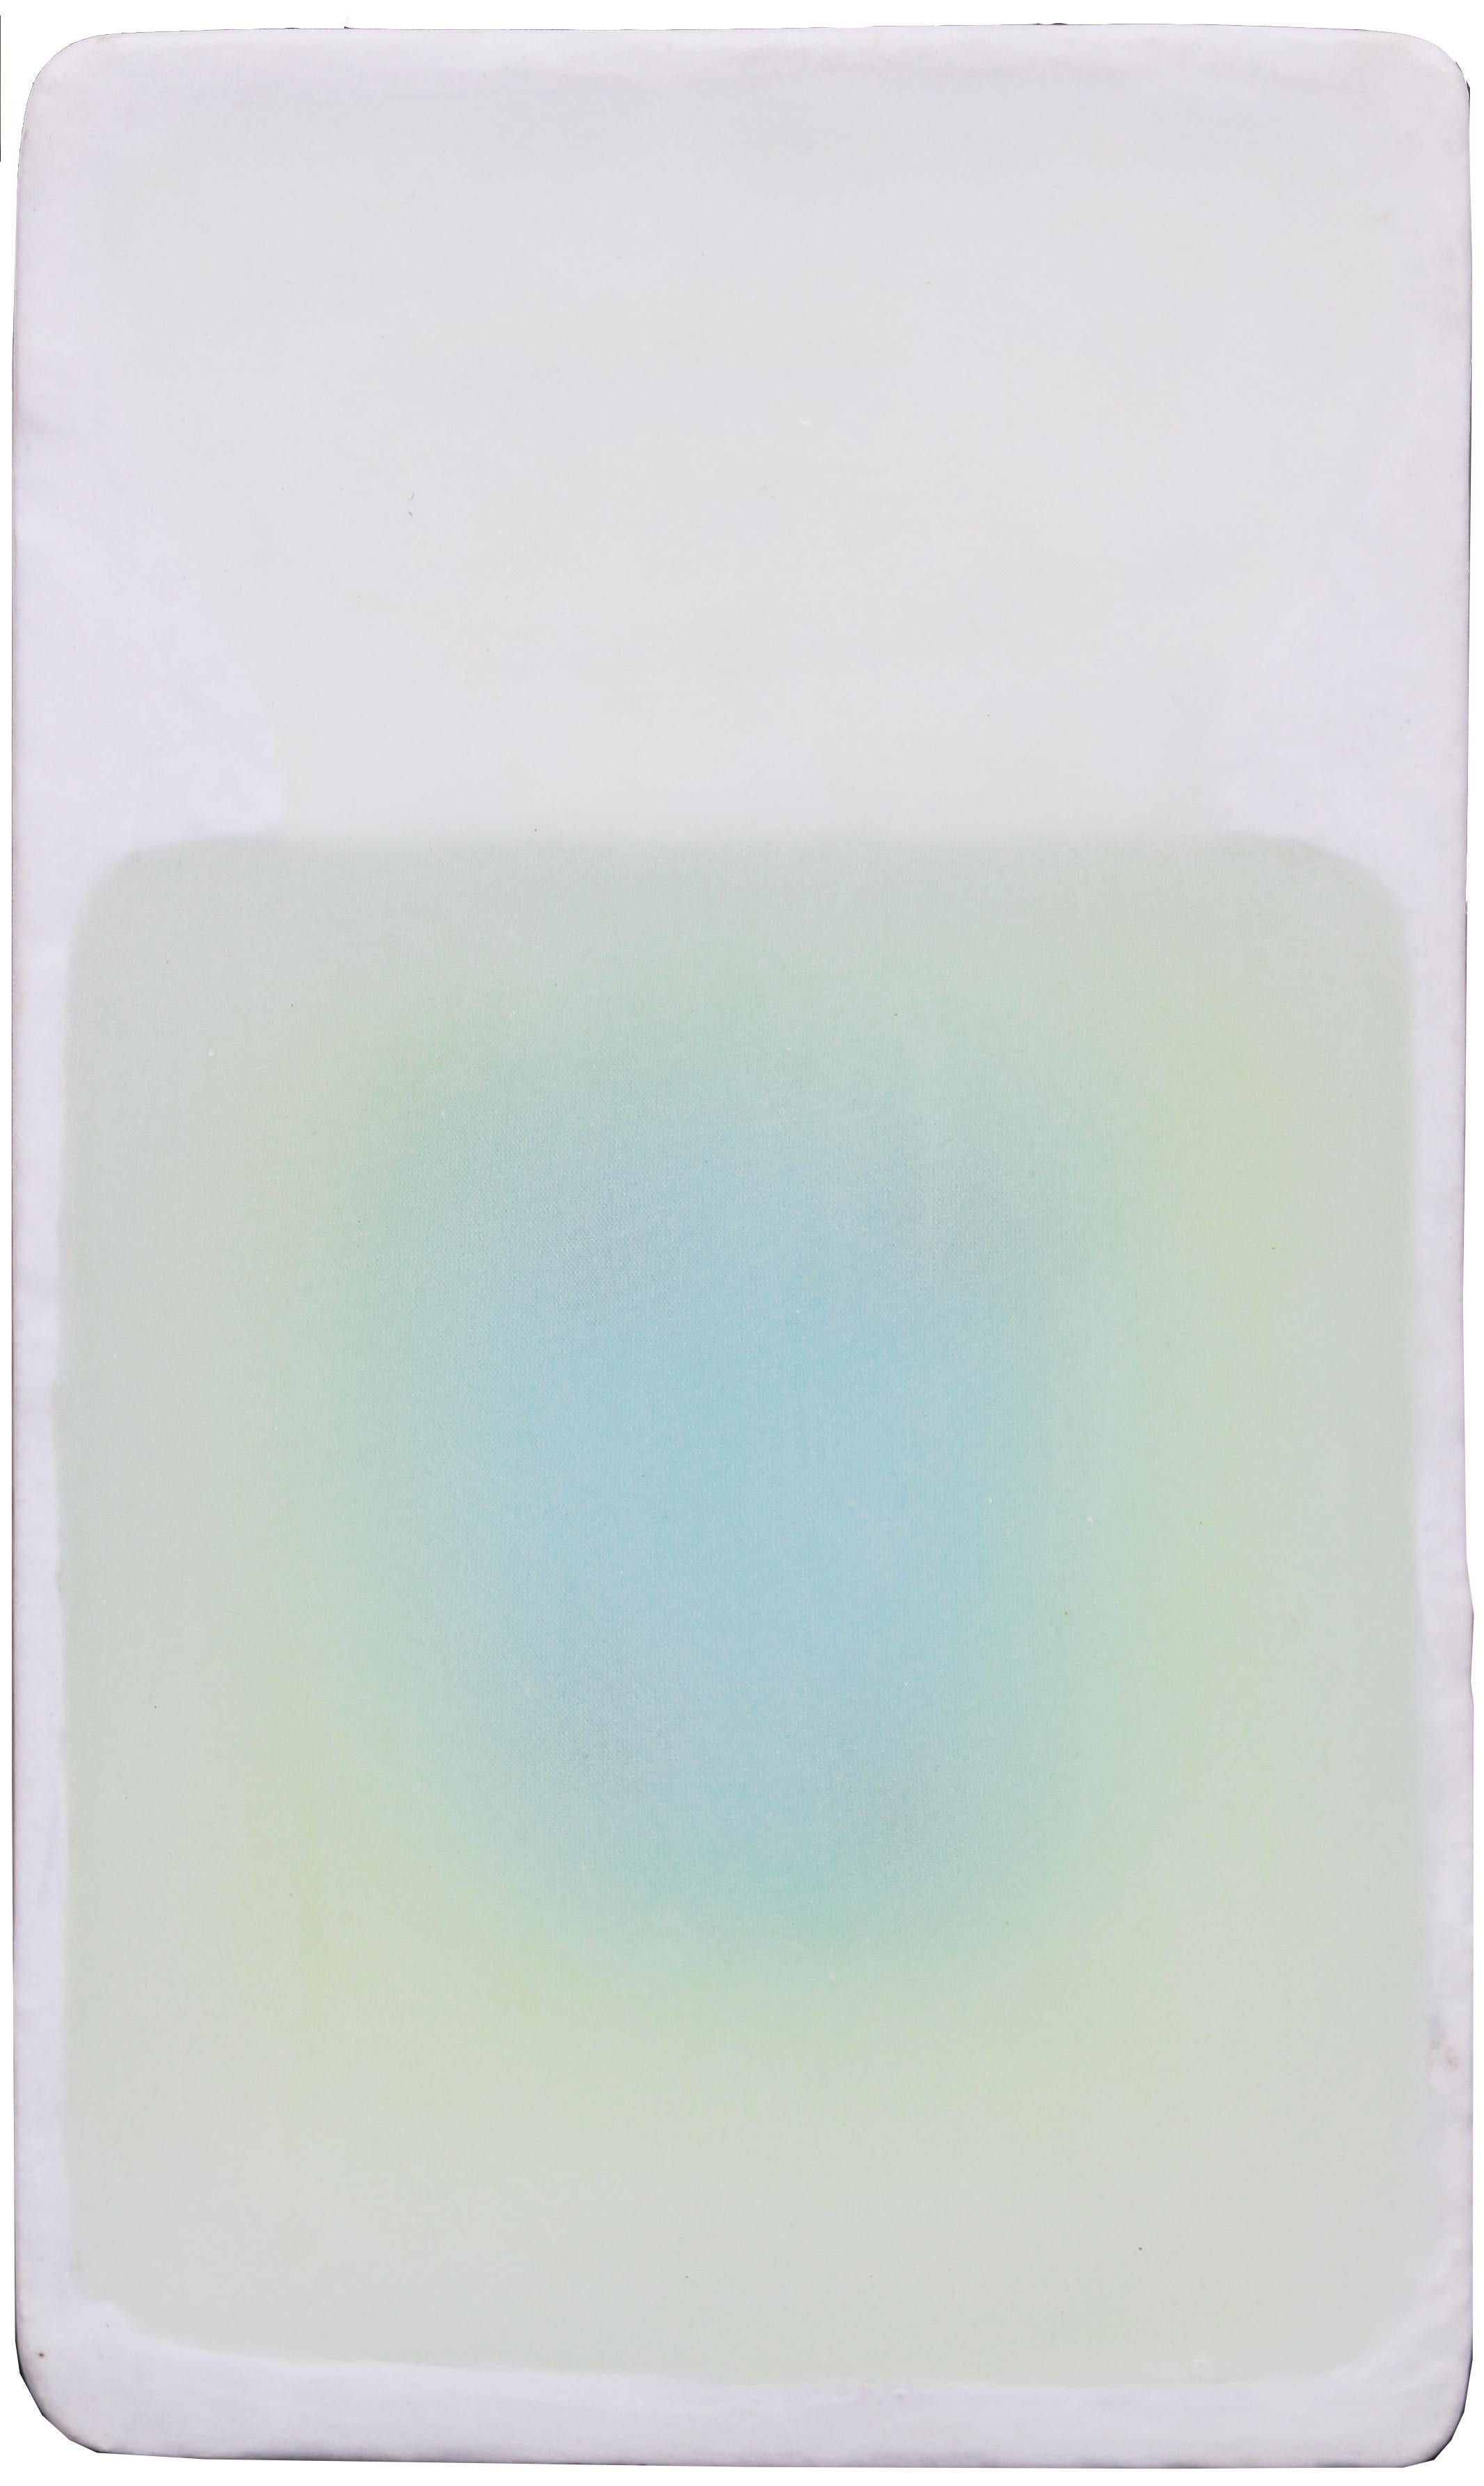 McKay Otto Abstract Painting - Blue, Green, and White Abstract Contemporary Two-Dimensional Wall Sculpture 